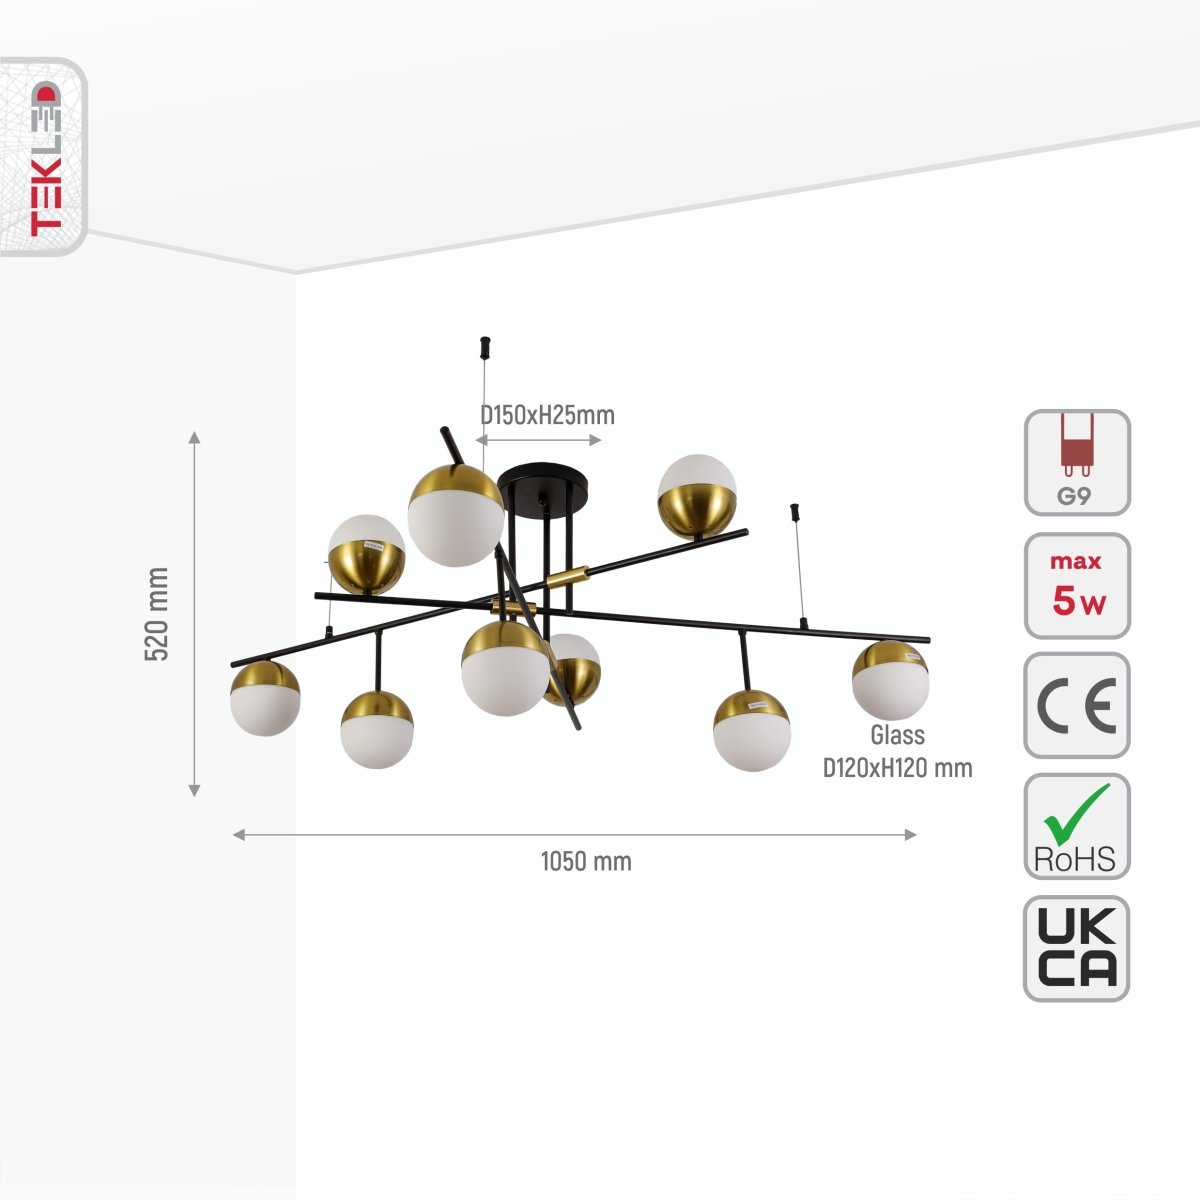 Size and specs of Opal Globe Glass Gold Black Metal Body Modern Nordic Chandelier with 9xG9 Fittings | TEKLED 159-17540